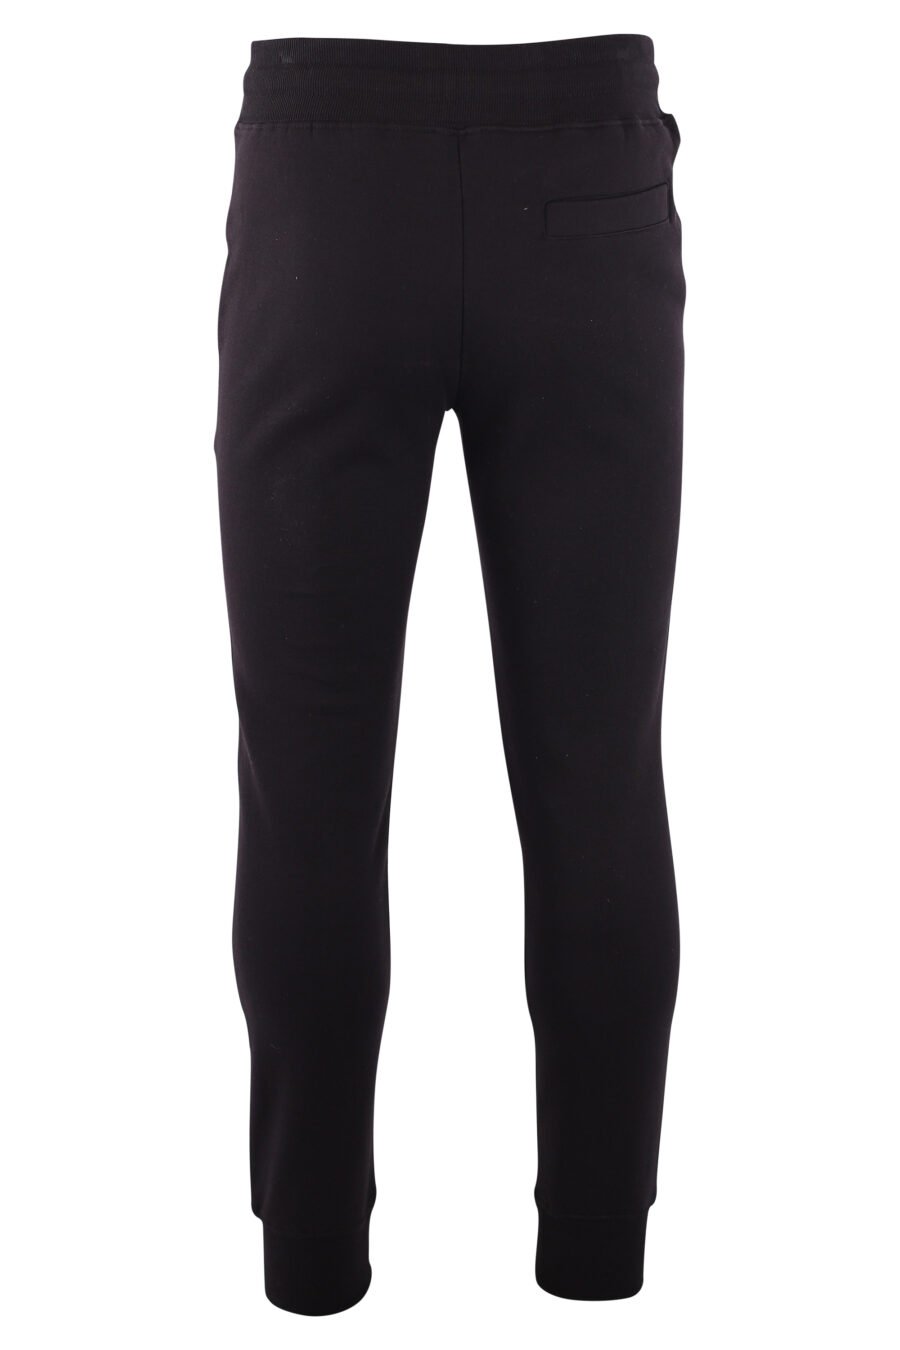 Tracksuit bottoms black with silver round logo - IMG 3219